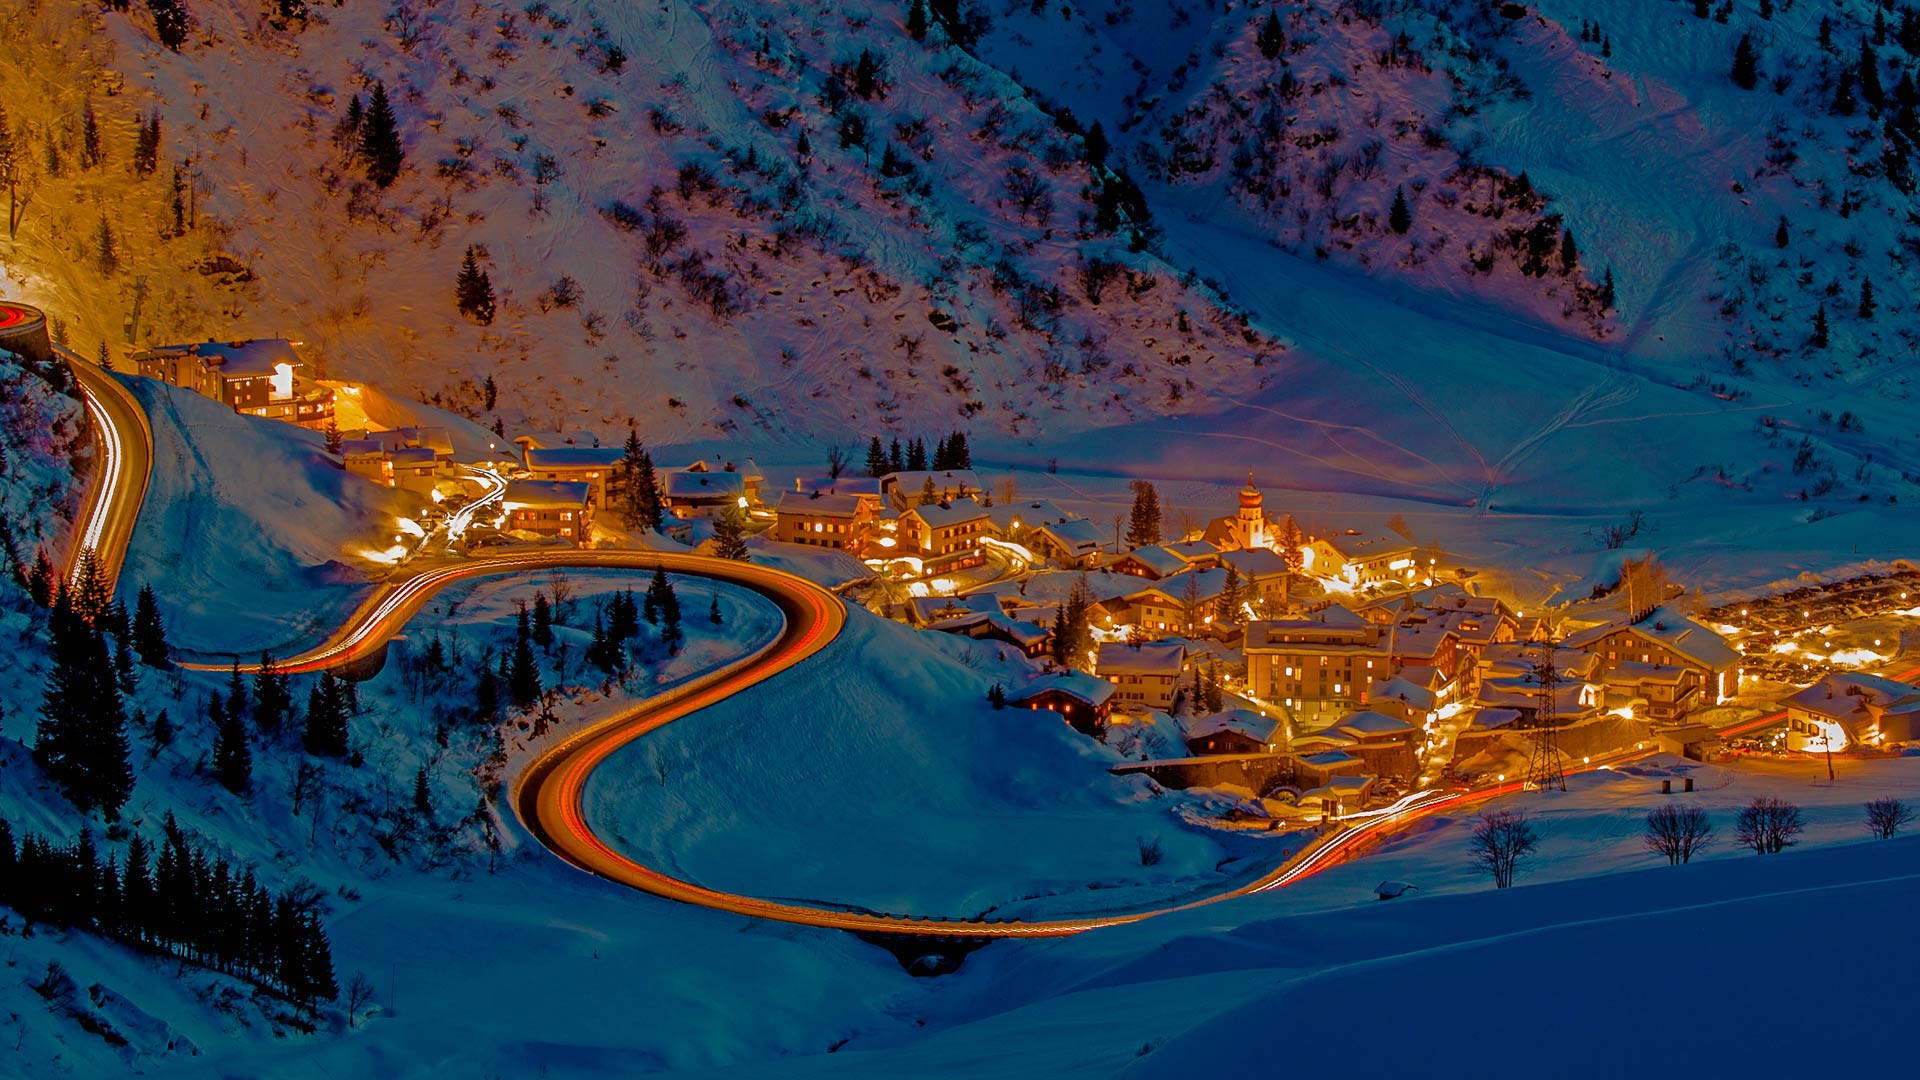 See the city lights reflecting on the snow-capped mountains with Bing Wallpaper